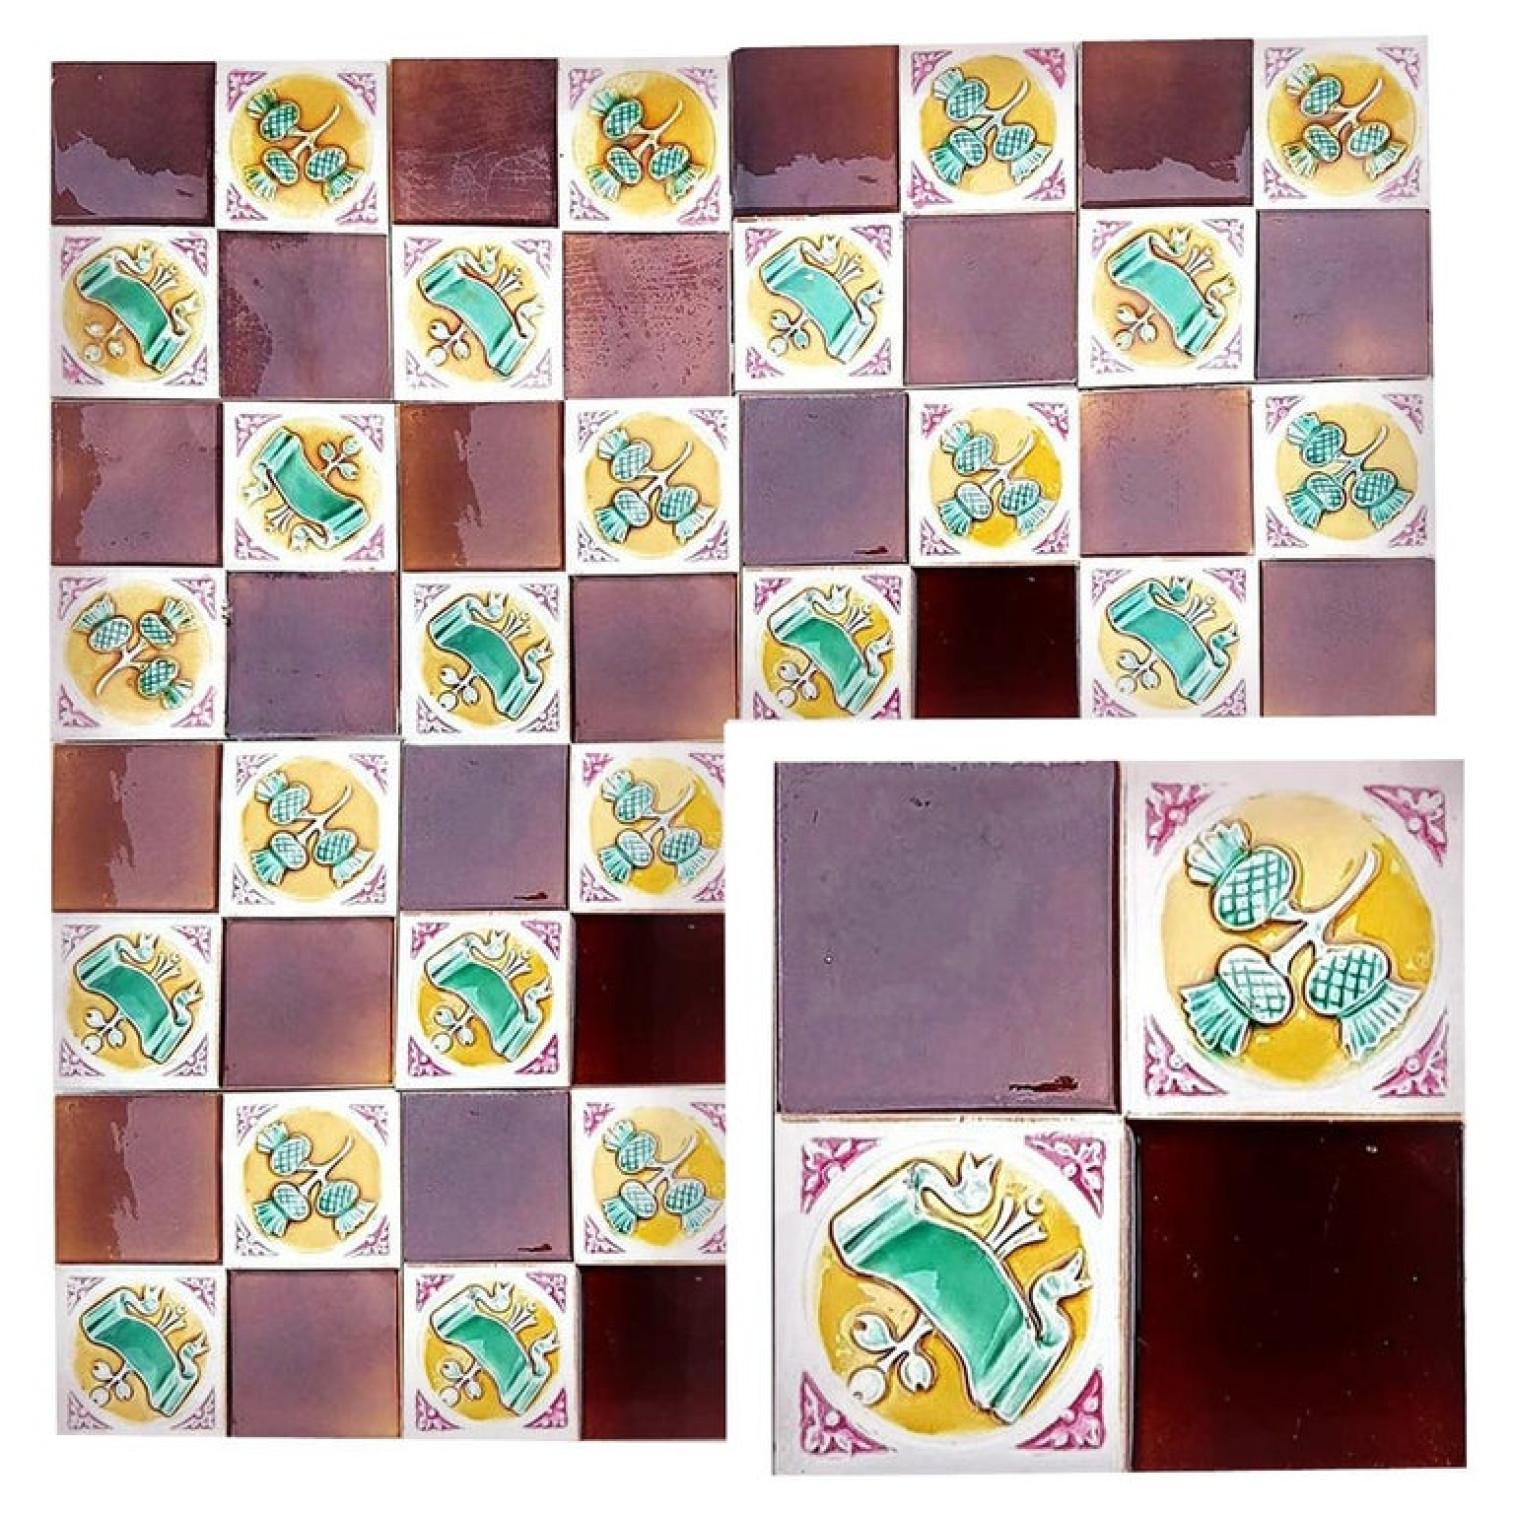 This is an amazing set of 115 original Art Deco handmade tiles by S.A. Faienceries de Bouffioulx, 1930s. A beautiful relief and color. With a stylish design. These tiles would be charming displayed on easels, framed or incorporated into a custom